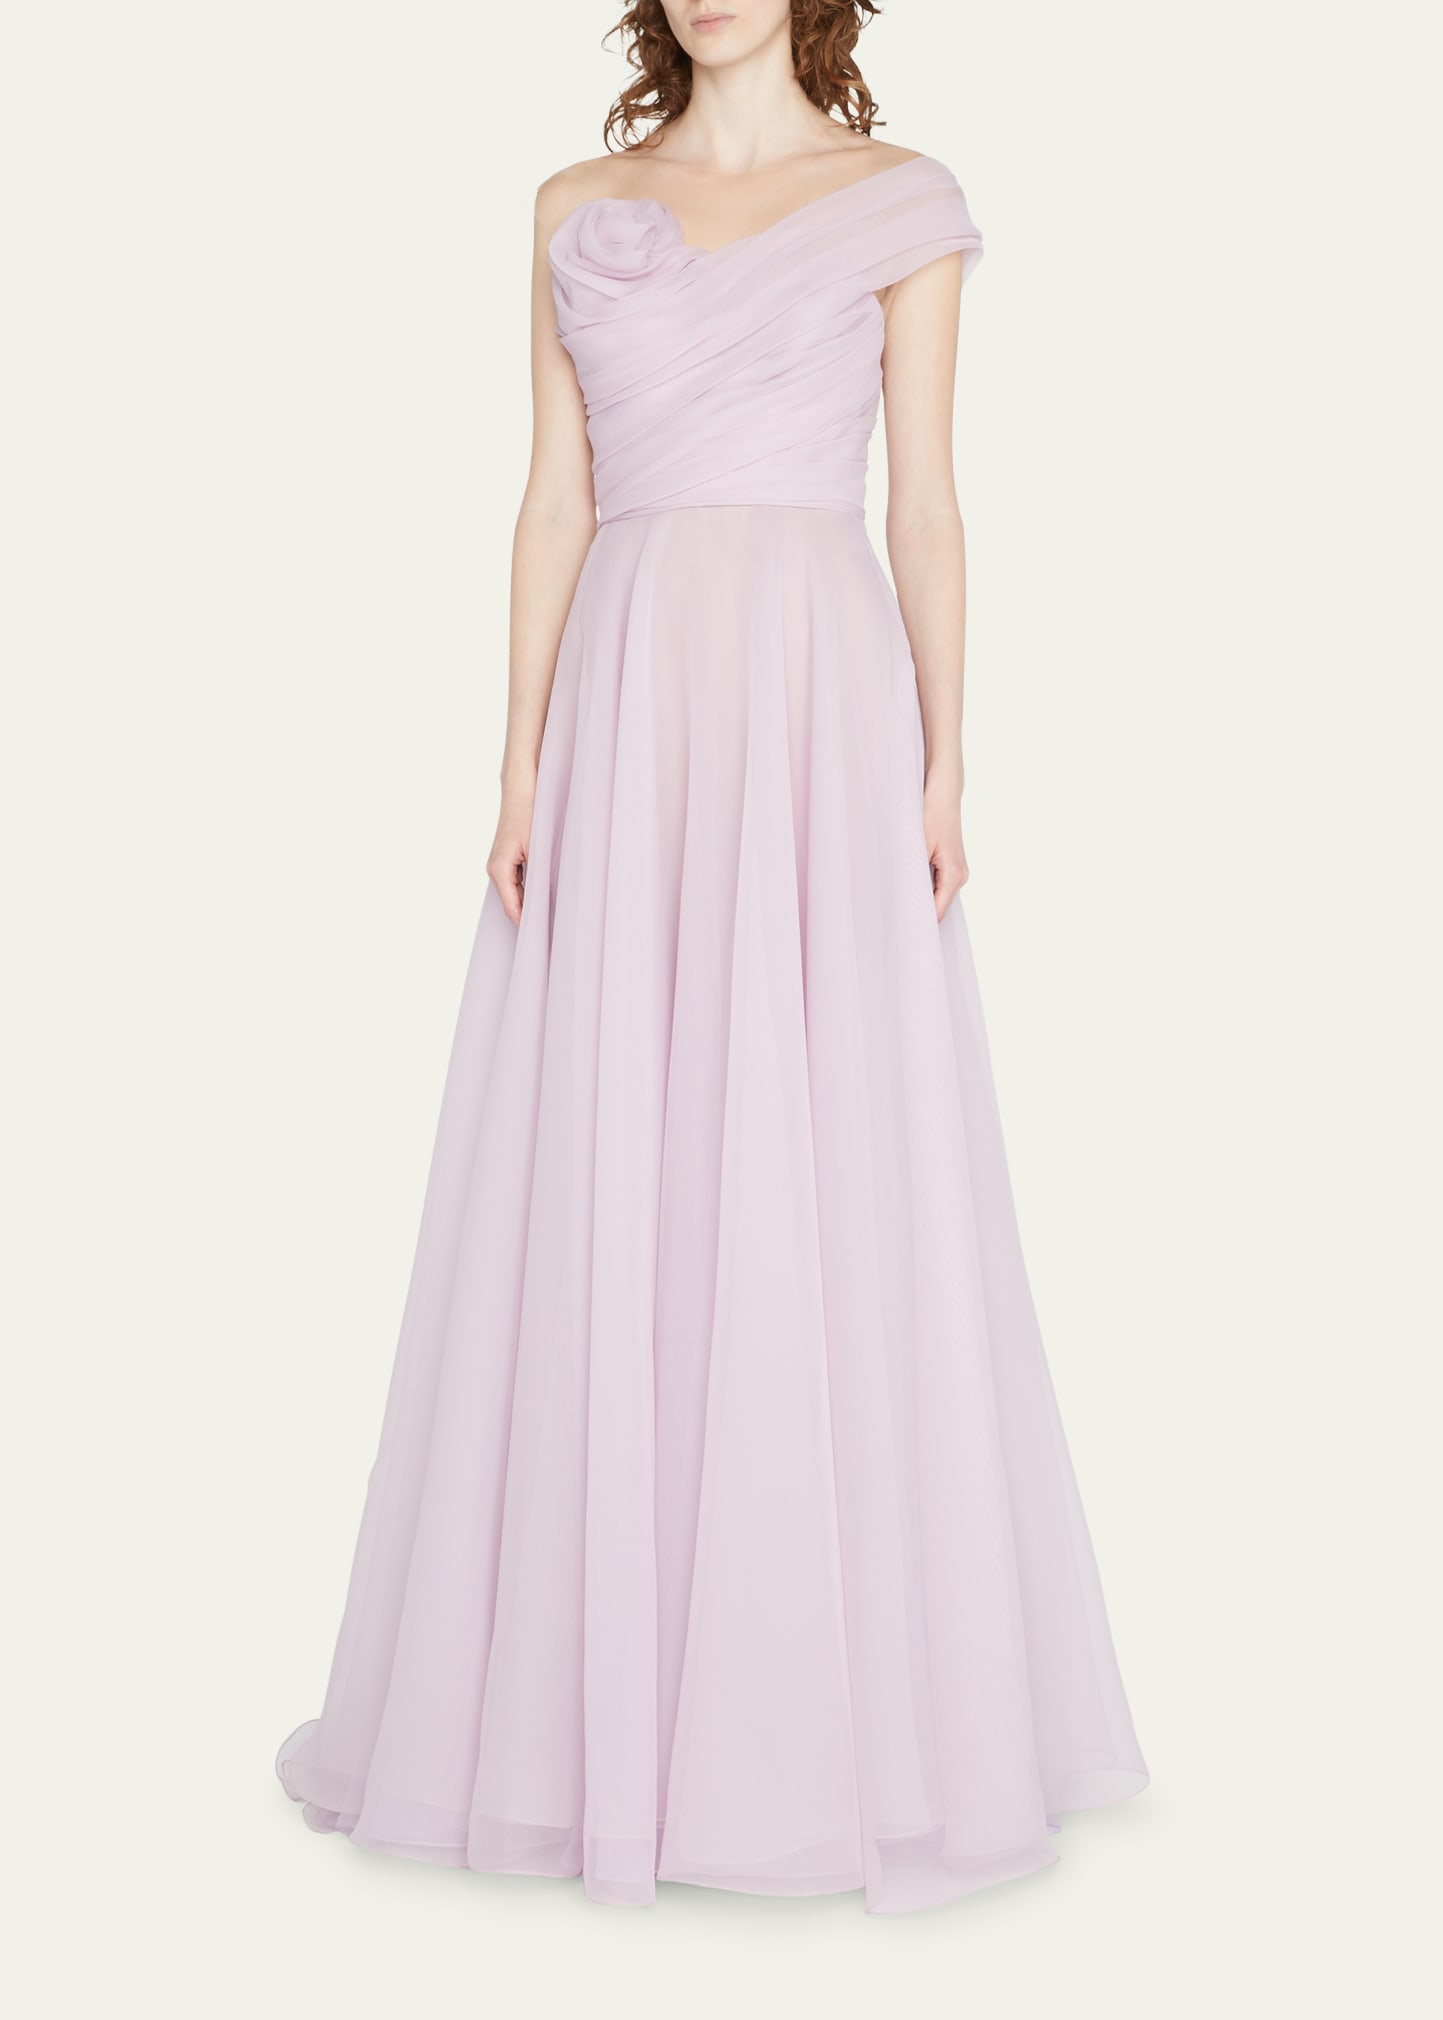 MARCHESA ROSE DRAPED ONE-SHOULDER ORGANZA GOWN